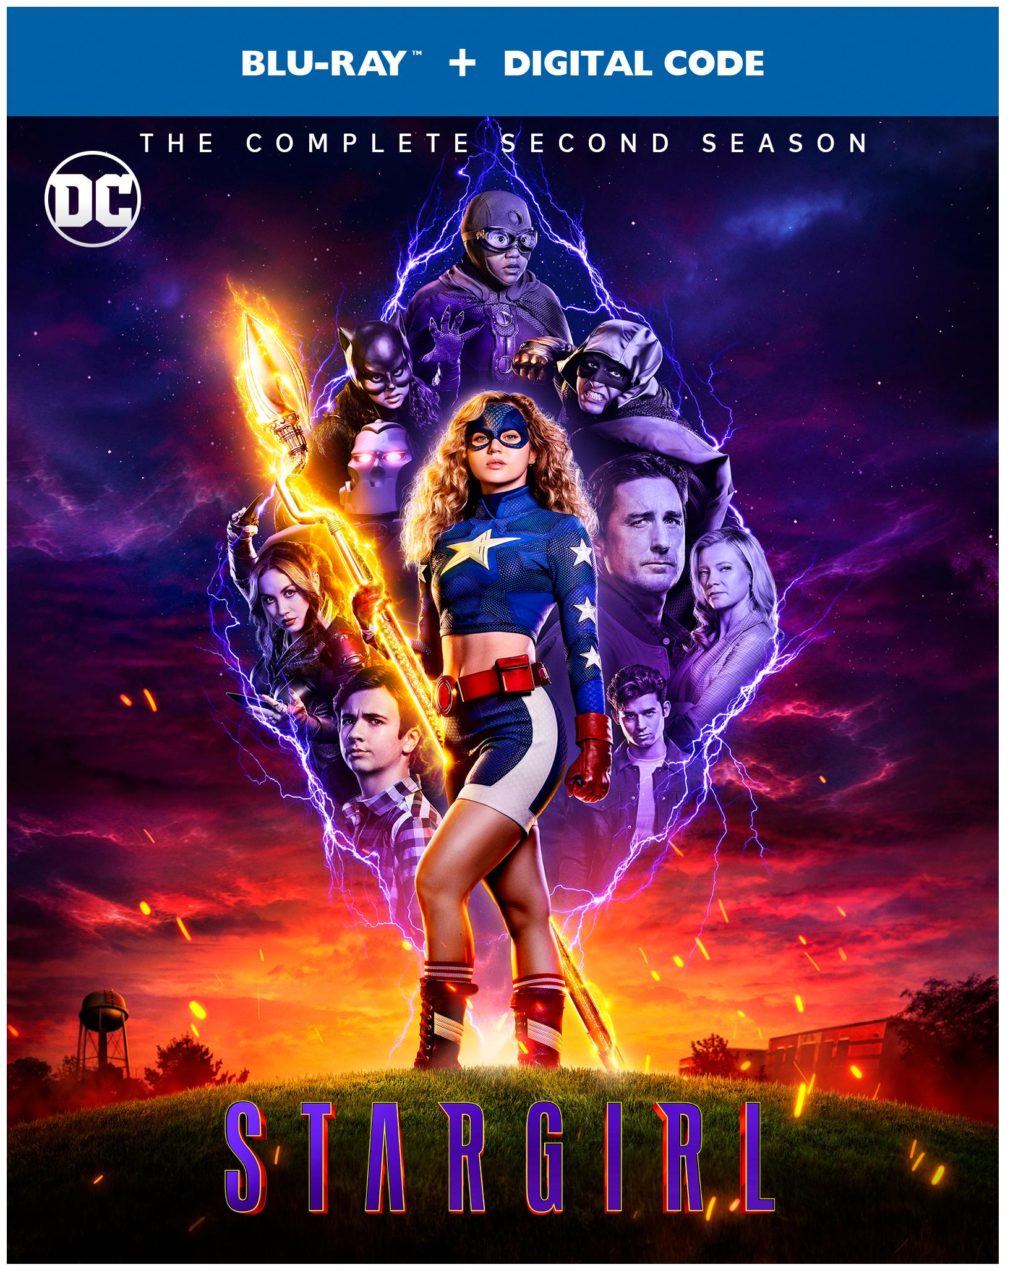 DC's Stargirl: The Complete Second Season Blu-Ray Combo Pack cover (Warner Bros. Home Entertainment)